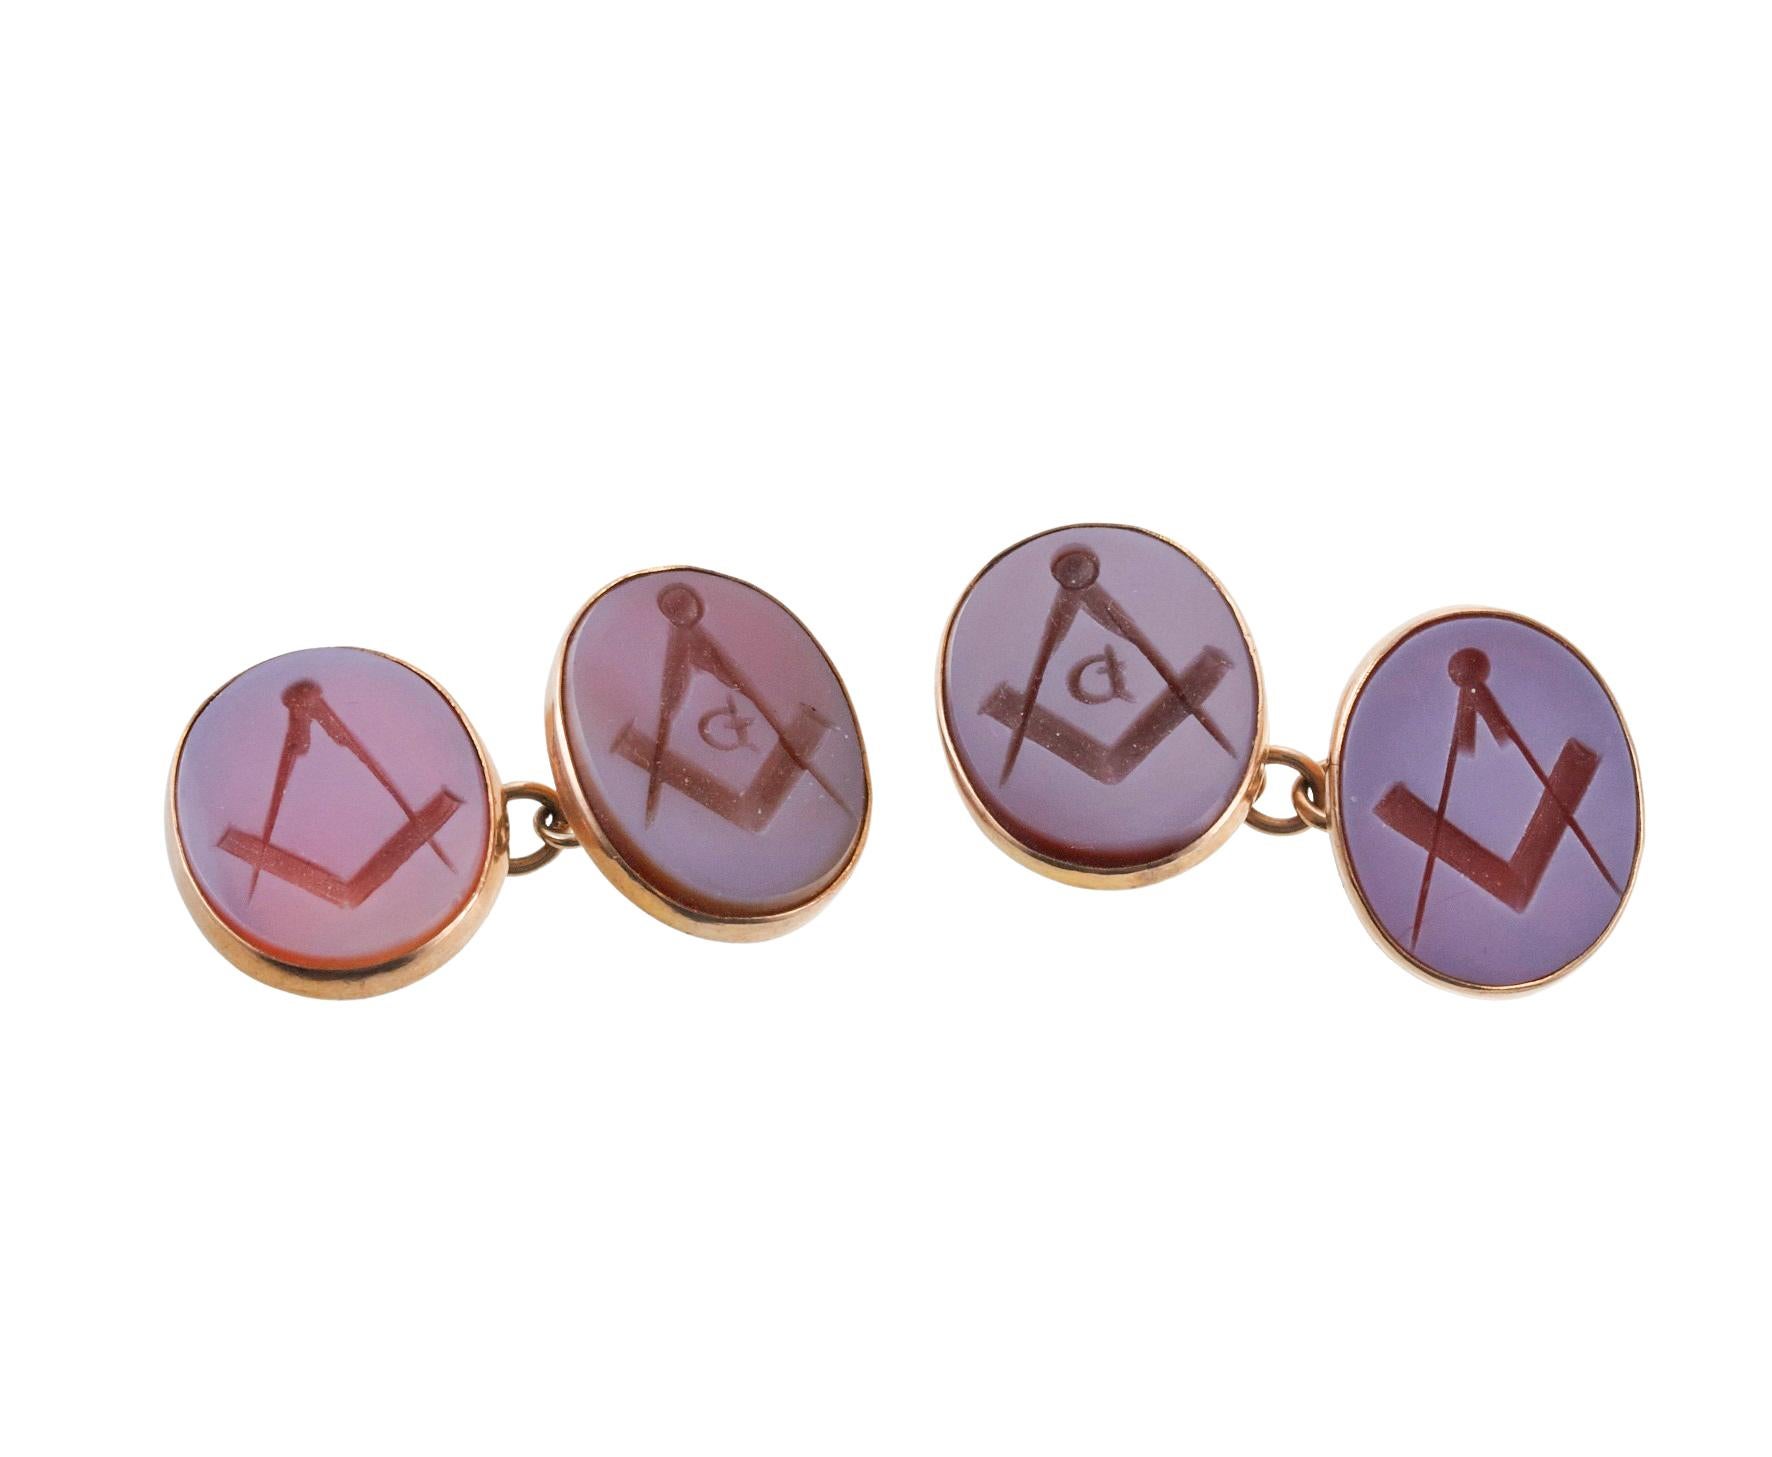 Antique English made pair of 9k gold cufflinks, depicting Masonic logo, in agate intaglio. Each oval top measures 19mm x 15mm. Comes in original box. Marked 9ct, 901. Weight - 9.7 grams. 